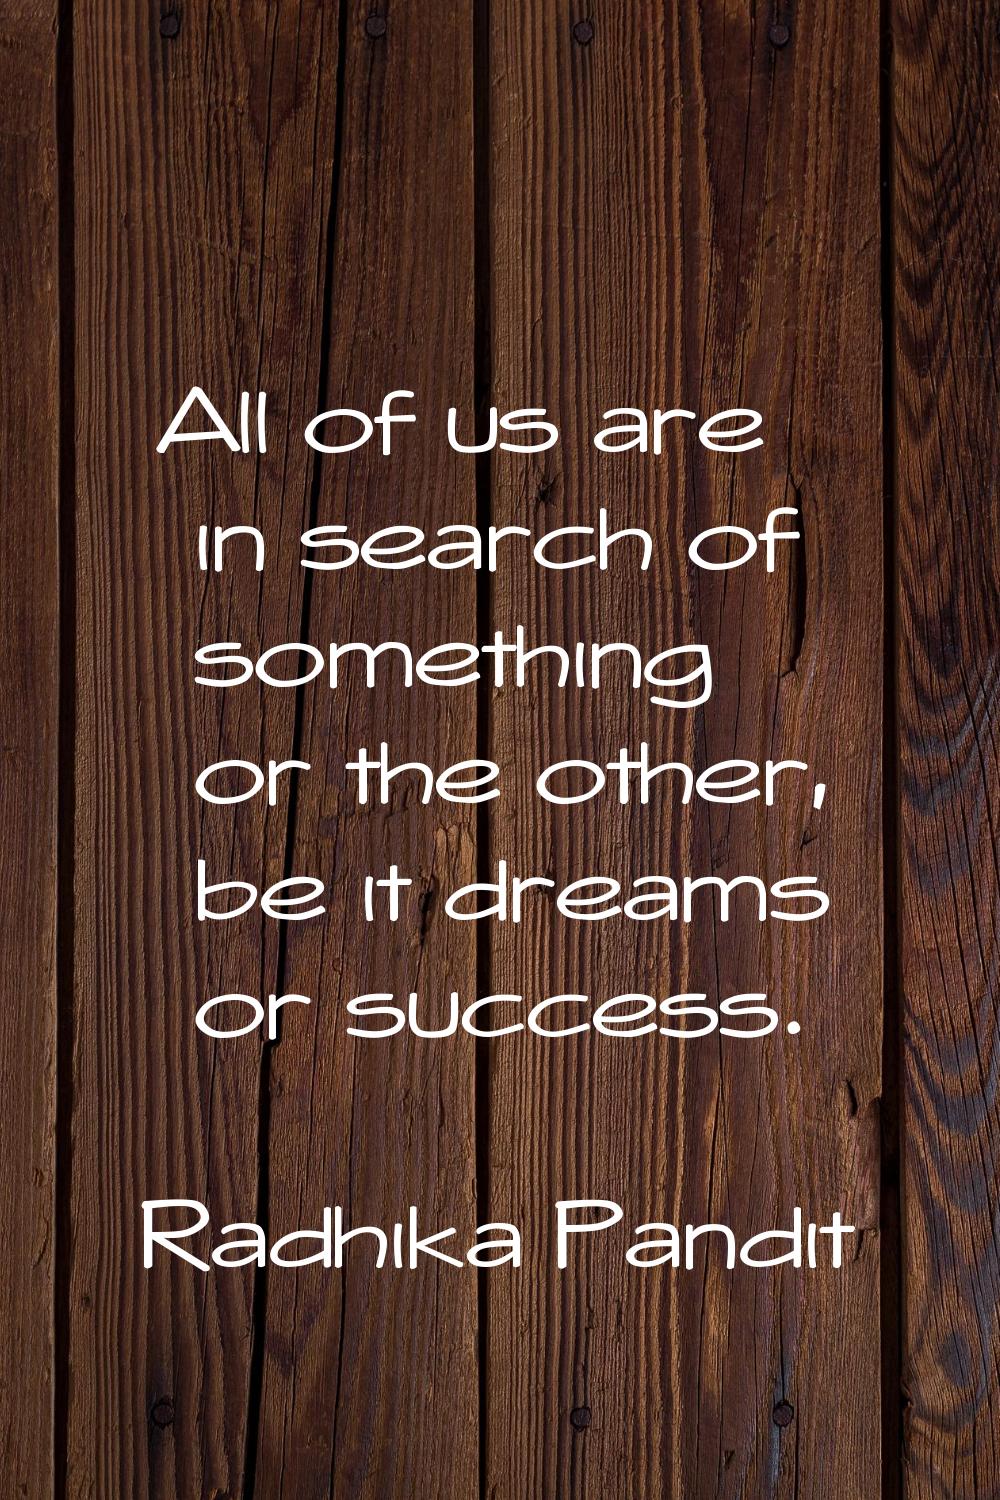 All of us are in search of something or the other, be it dreams or success.